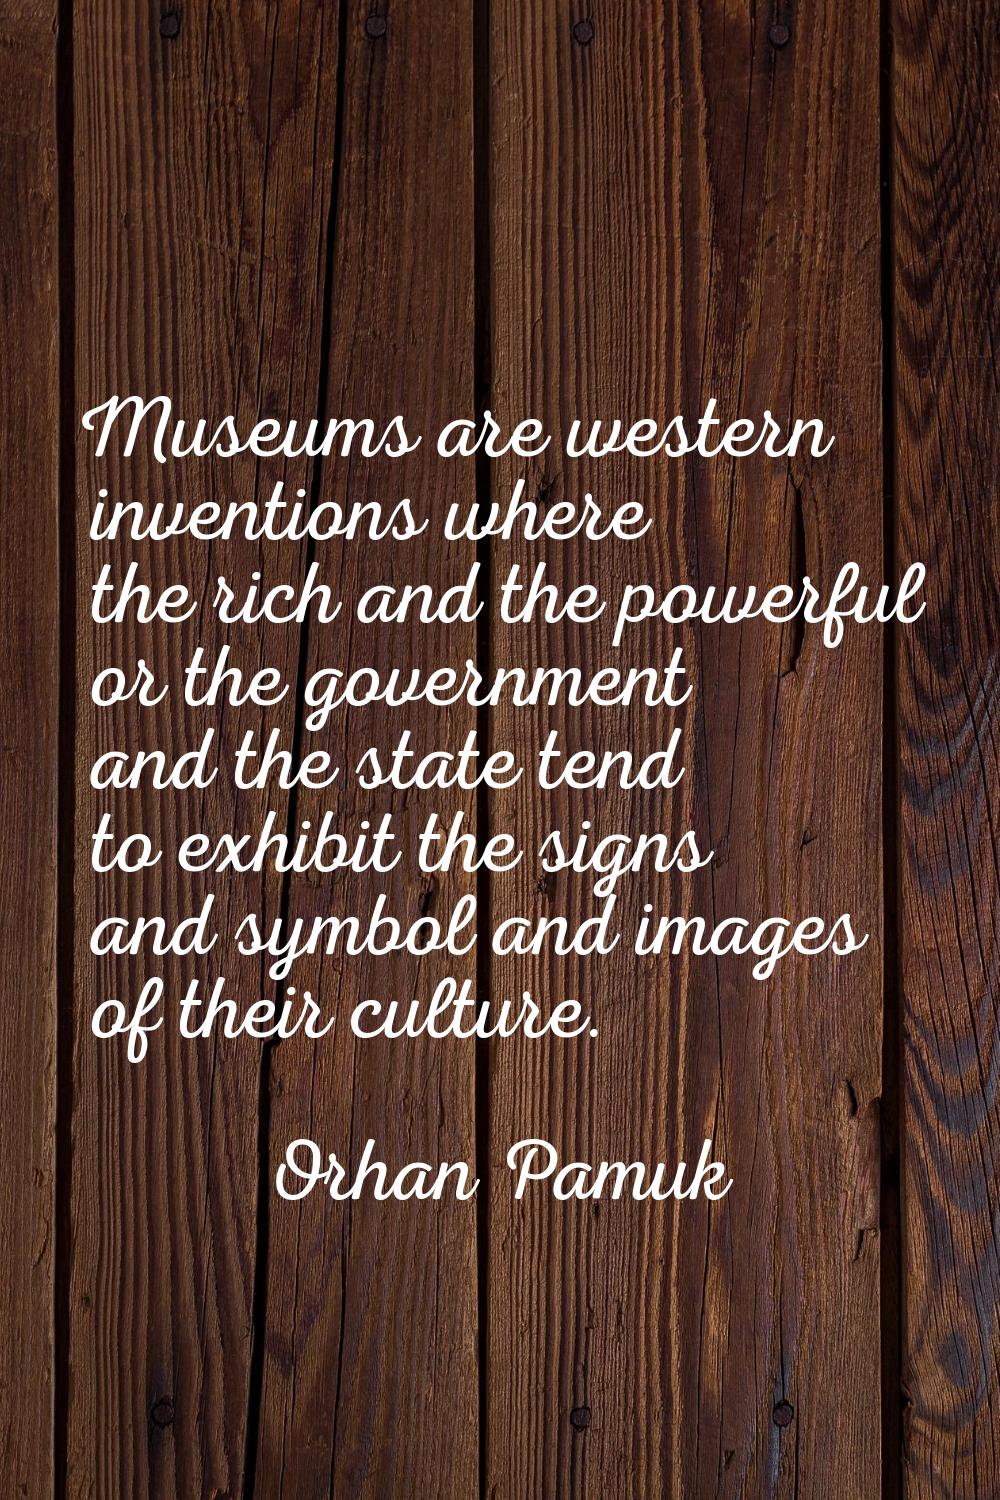 Museums are western inventions where the rich and the powerful or the government and the state tend